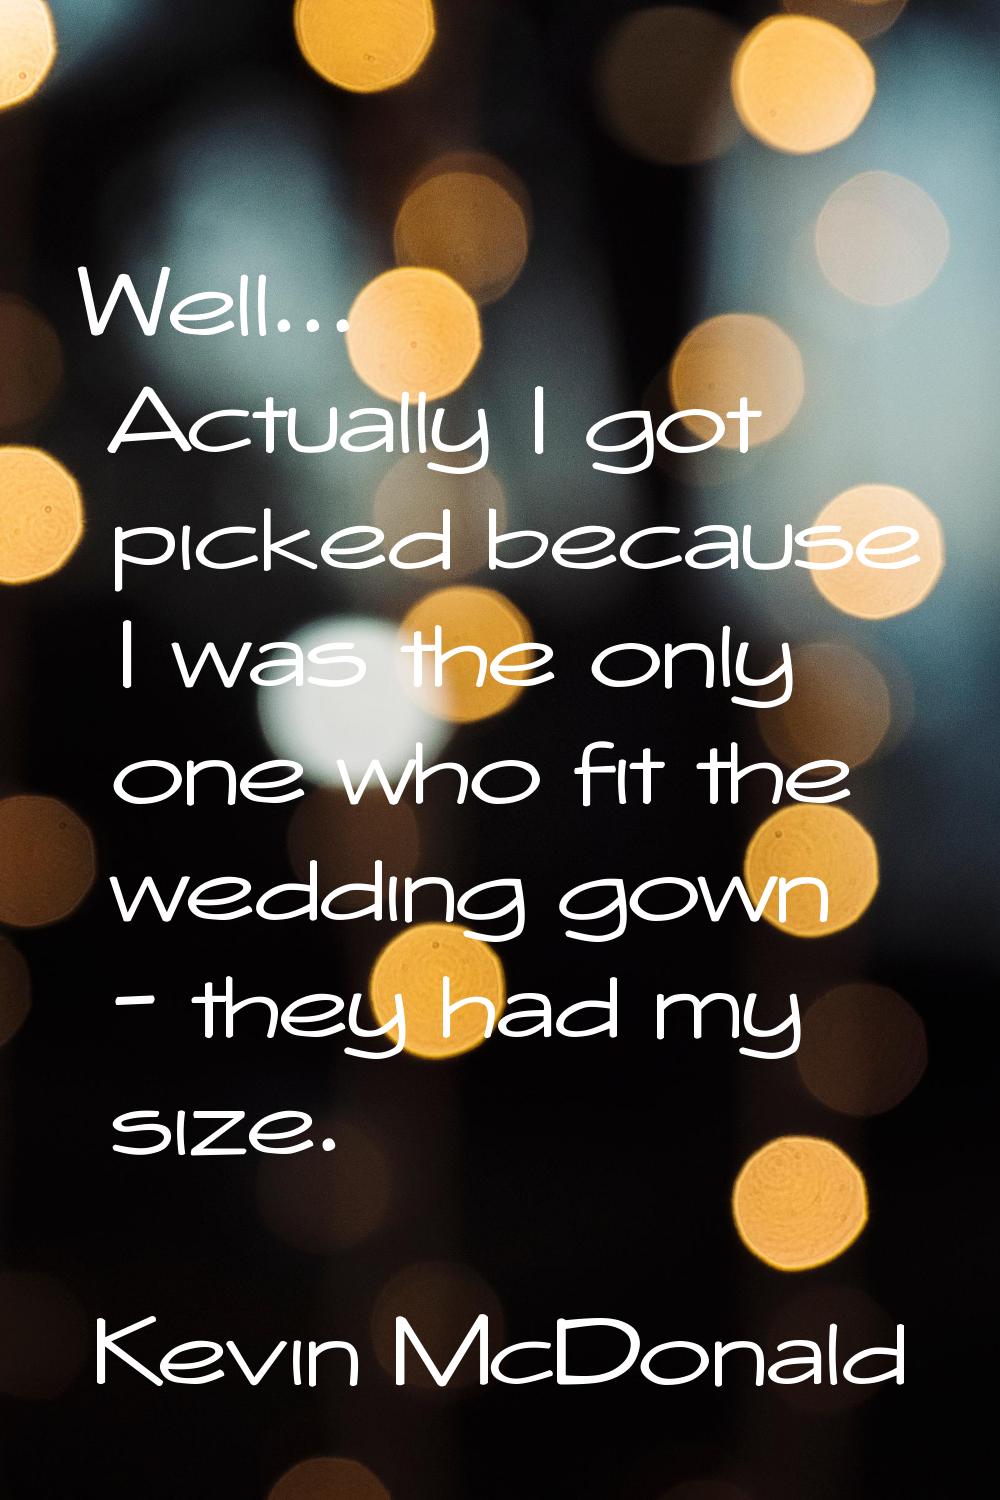 Well... Actually I got picked because I was the only one who fit the wedding gown - they had my siz